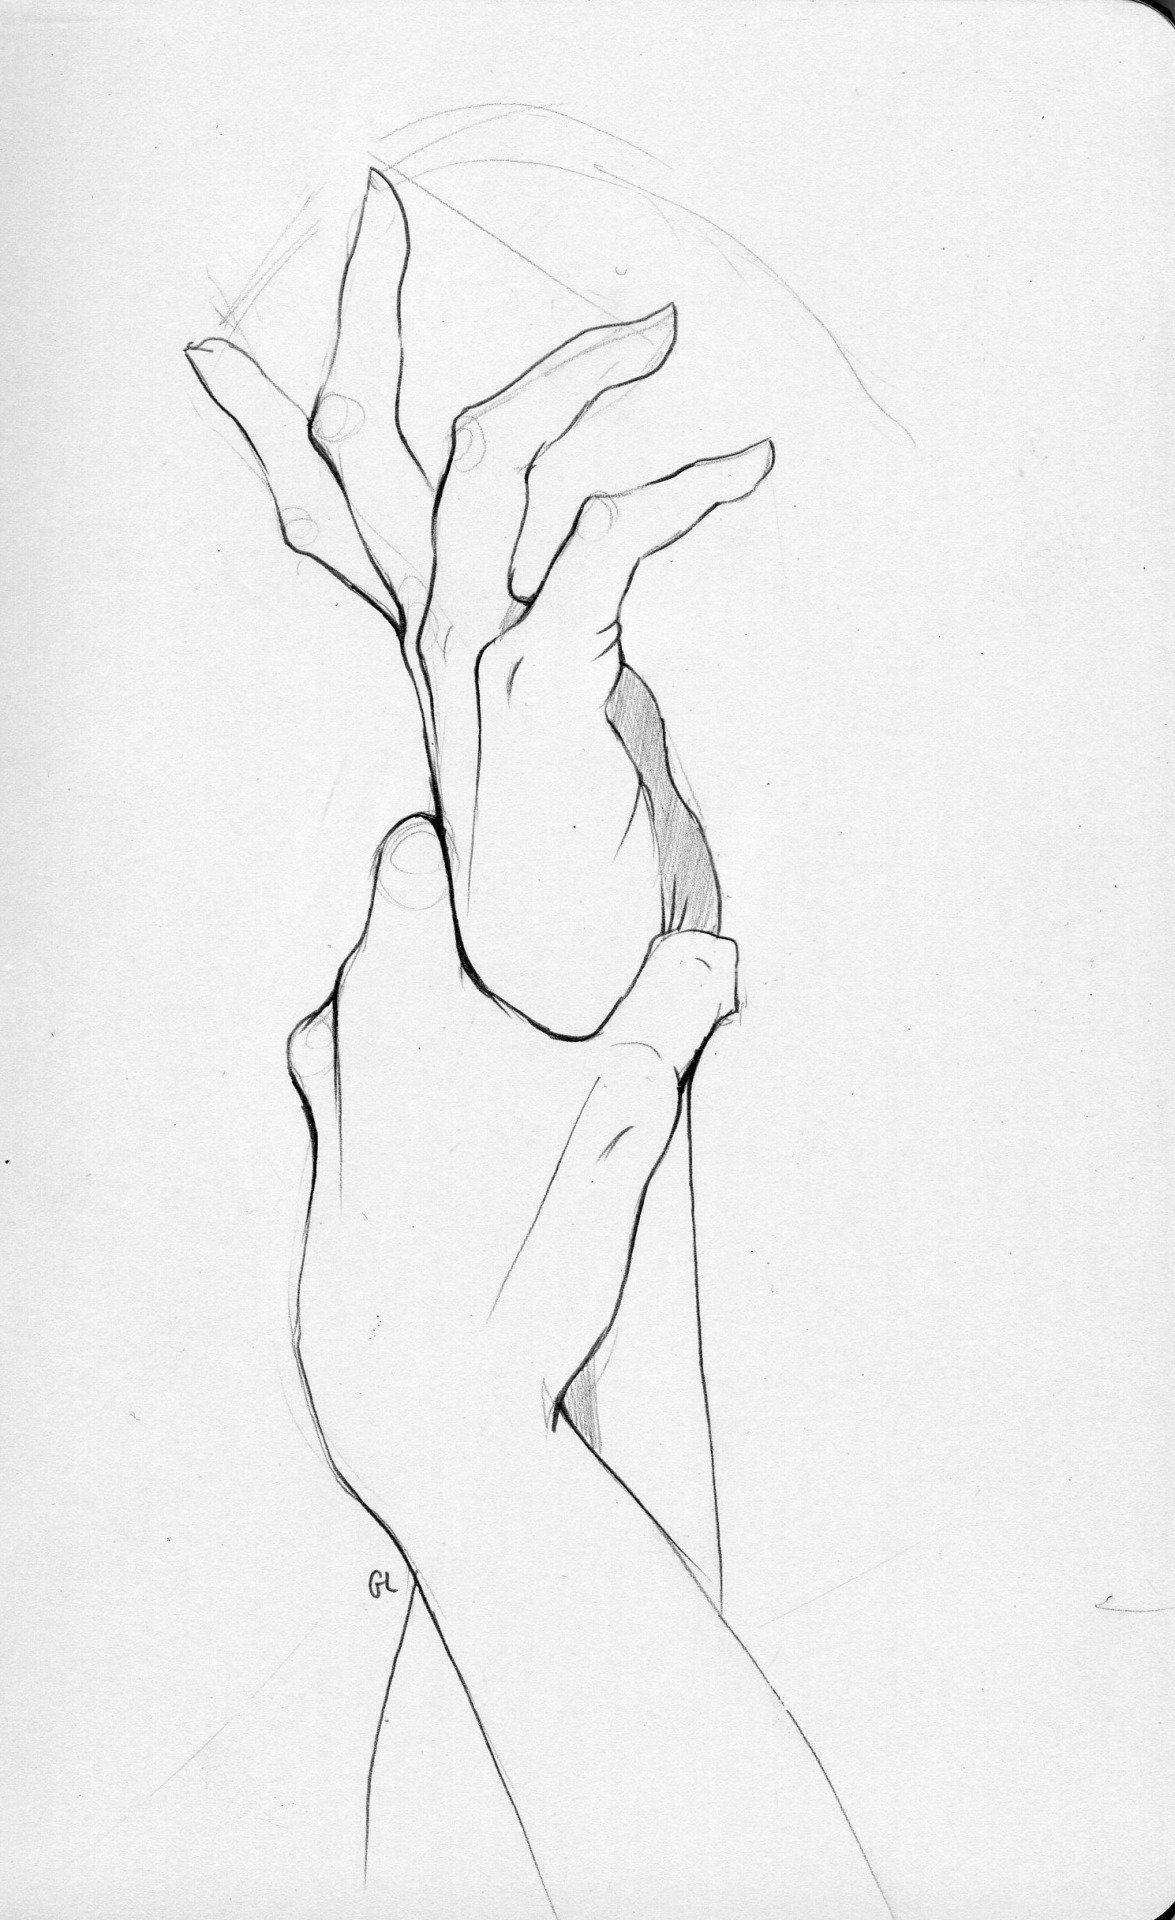 Naked people reaching hands